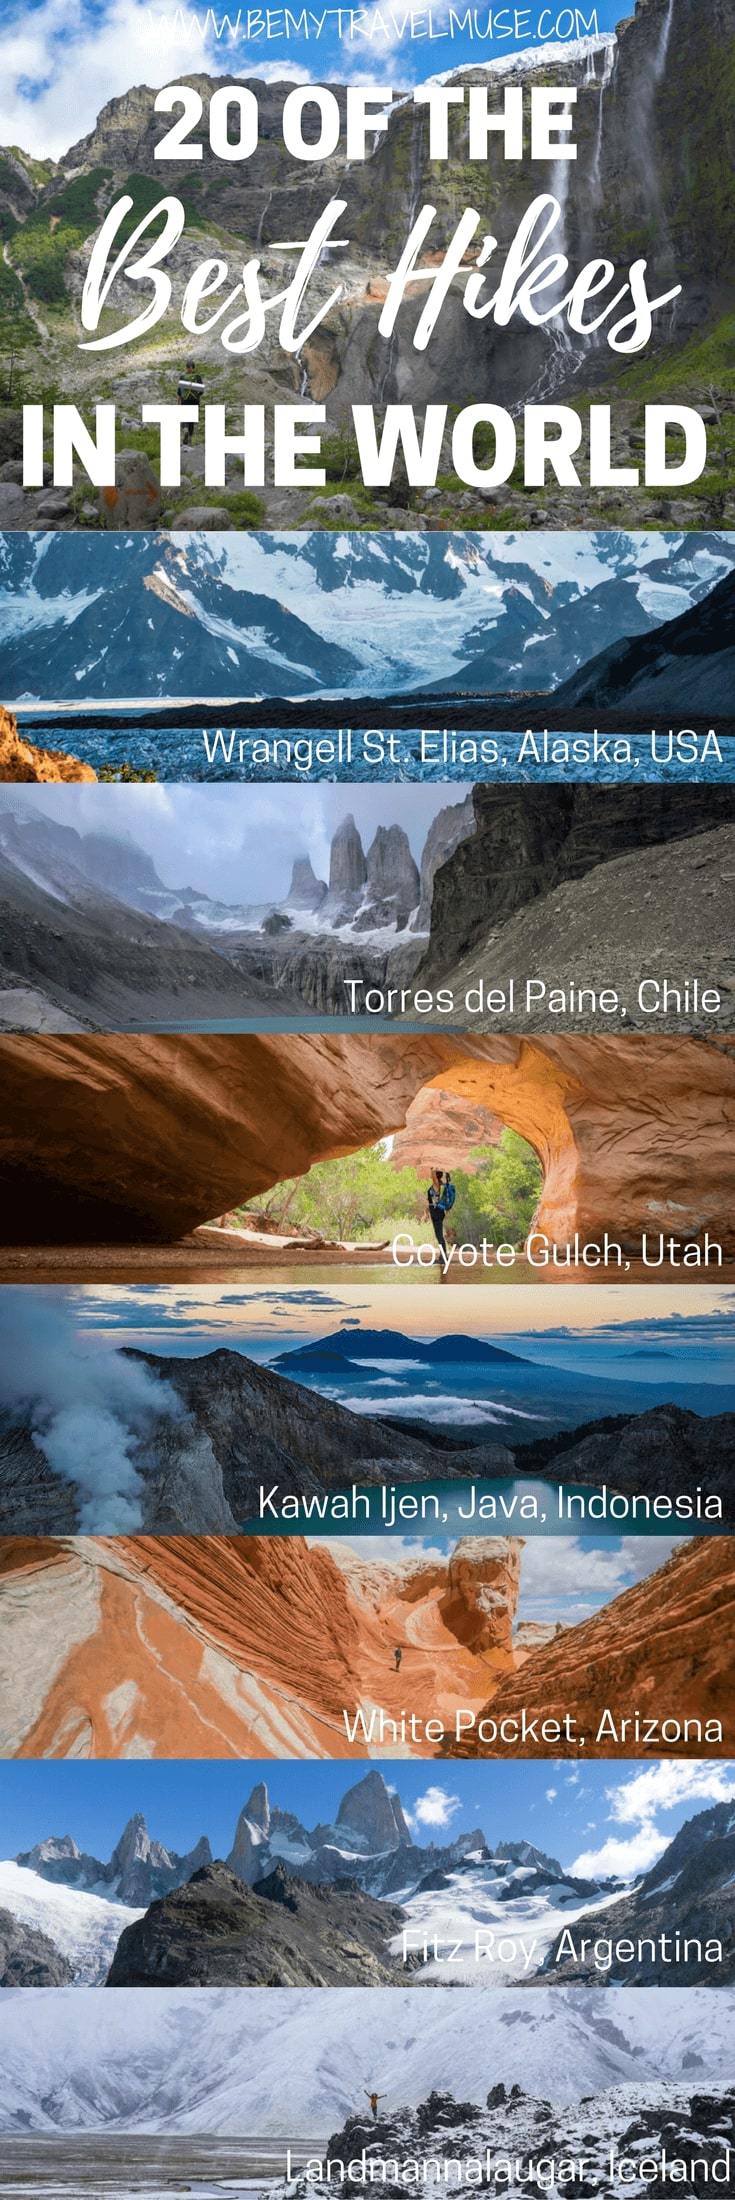 Here are the best hiking trails in the world, each has something incredible and unique to offer. Which one is your favorite? Be My Travel Muse | hiking Kyrgyzstan | Wrangell St. Elias Alaska | Annapurna Circuit Nepal | Huemul Circuit Argentina | Torres del Paine Chile | Coyote Gulch Utah | Kawah Ijen Java Indonesia | Cerro Tronador Argentina | Edelweissweg Switzerland | The Drakensberg South Africa | Mt. Rinjani, Lombok, Indonesia | White Pocket Arizona | Mount Kinabalu Malaysia | hiking tips | outdoor activities | hiking women